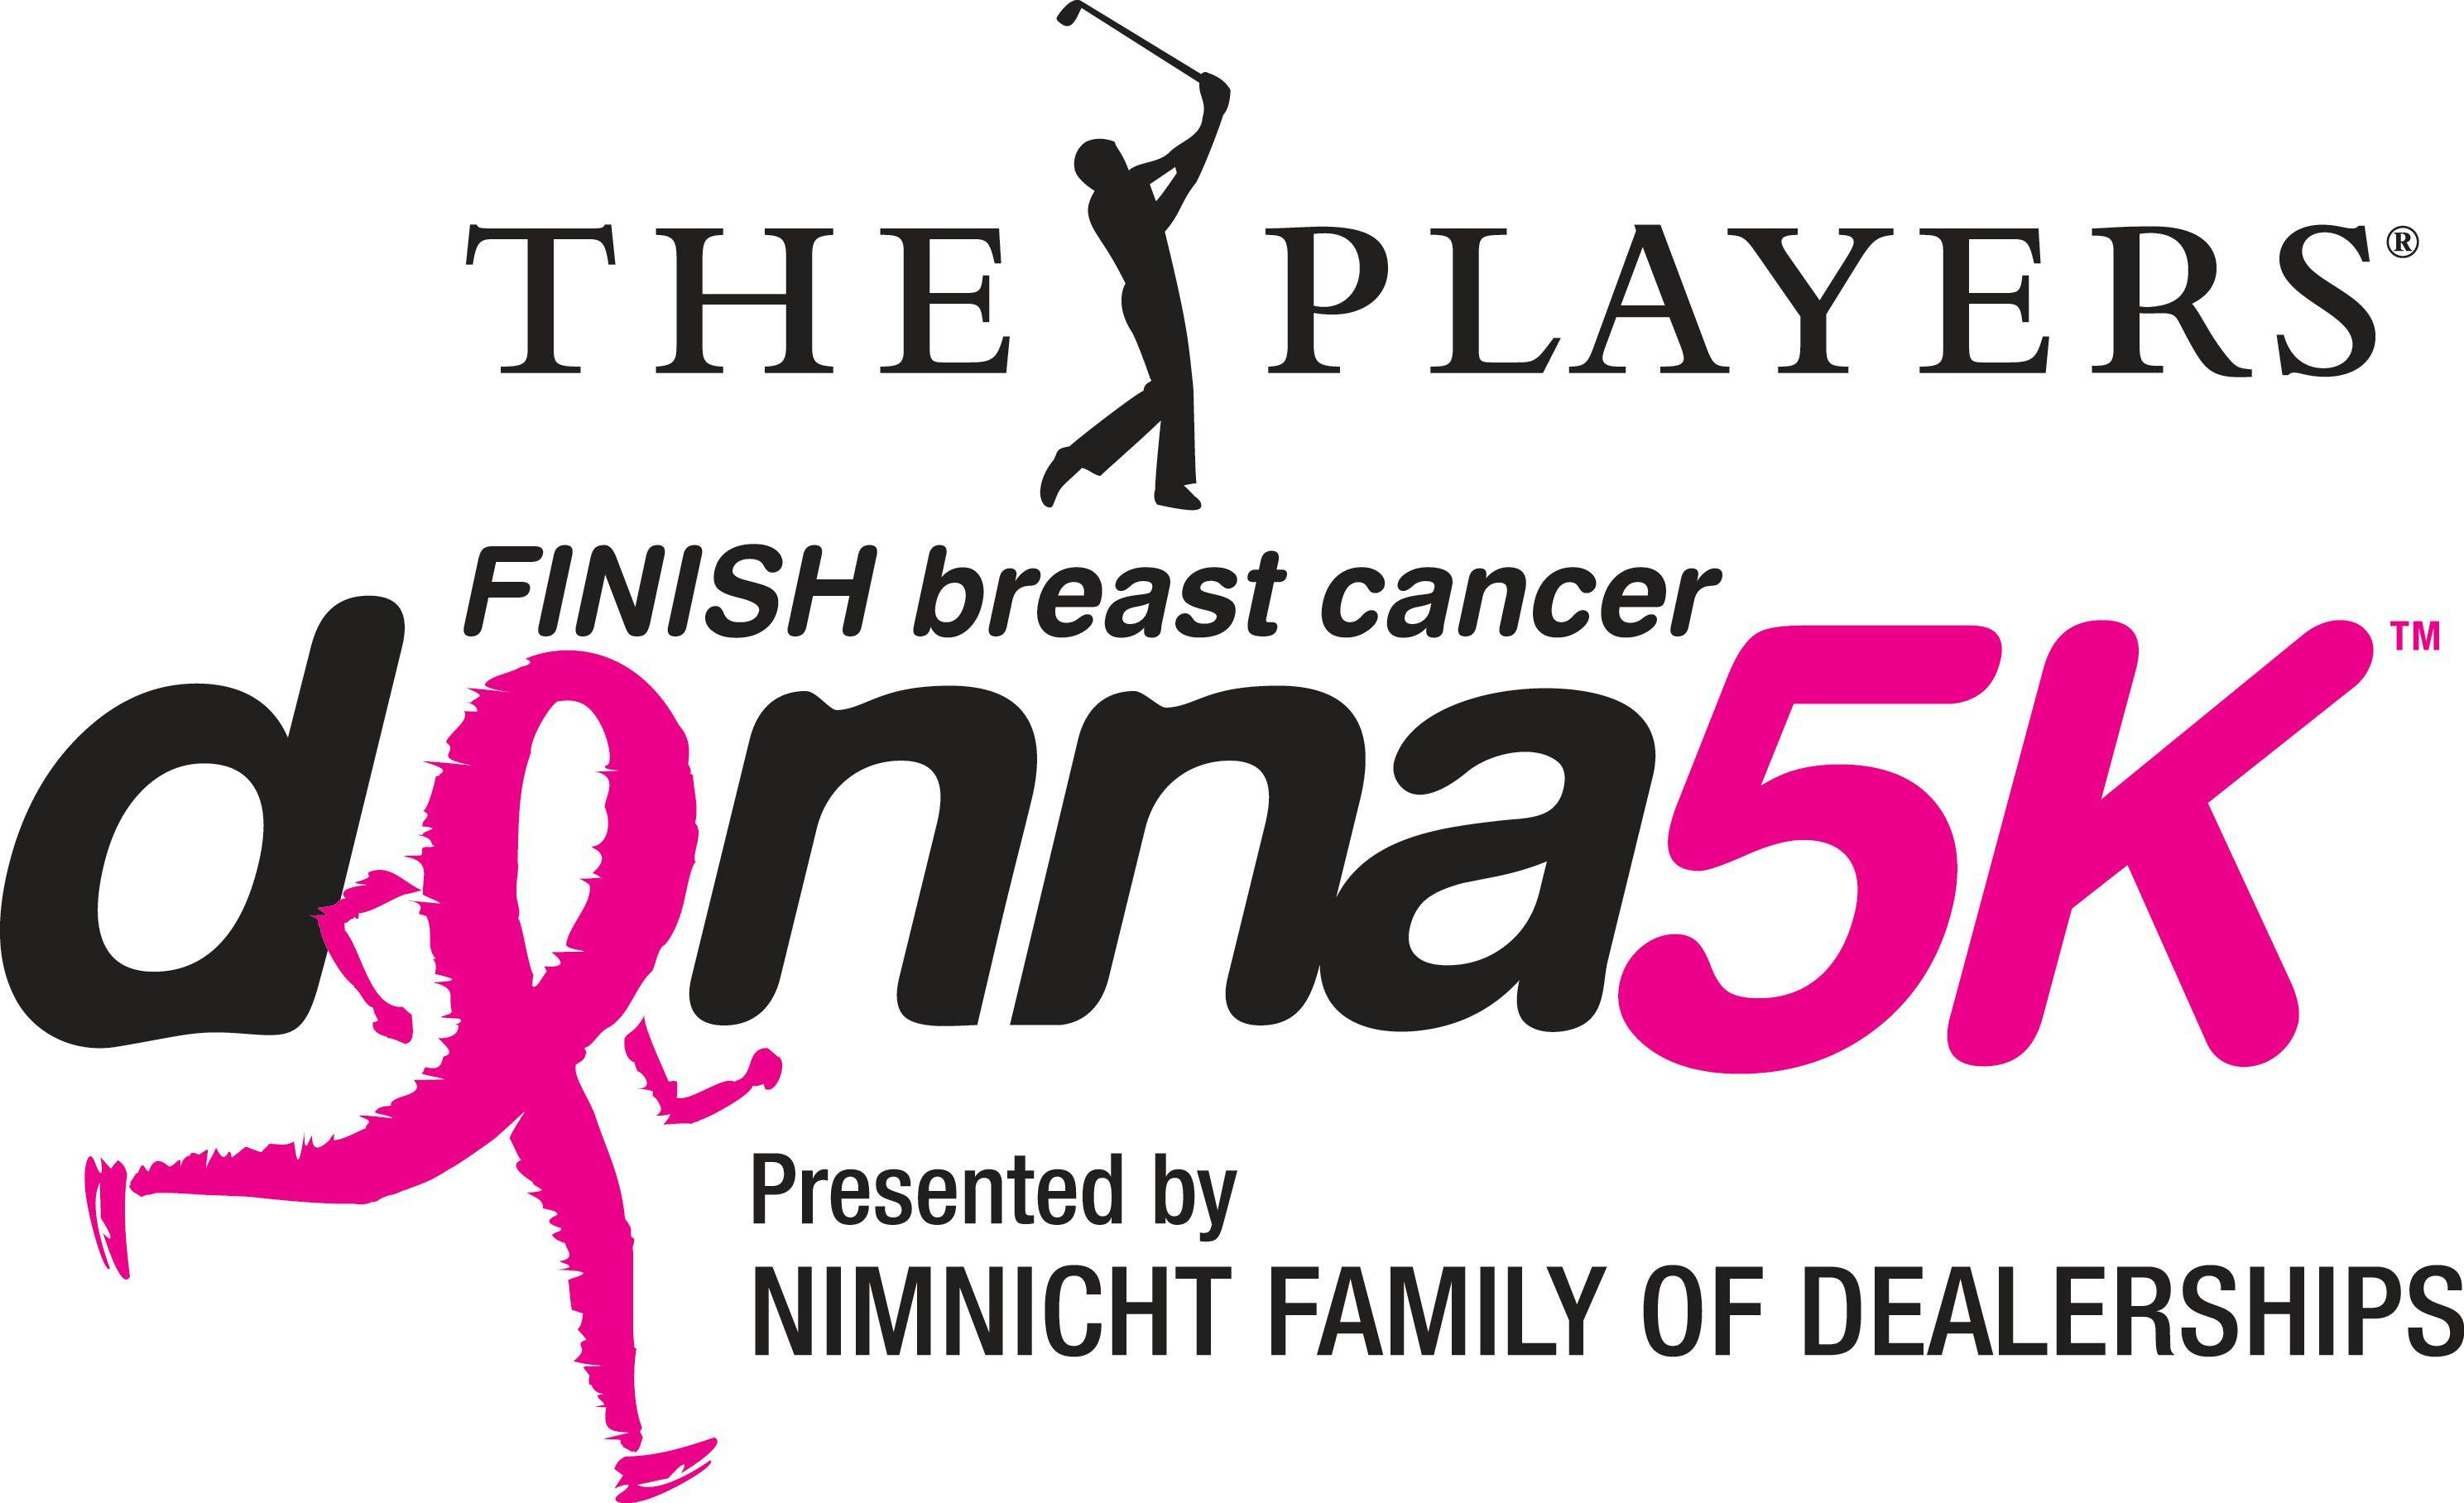 The DONNA Foundation Returns to In-Person Races with THE PLAYERS DONNA 5K Presented by Nimnicht Family of Dealerships